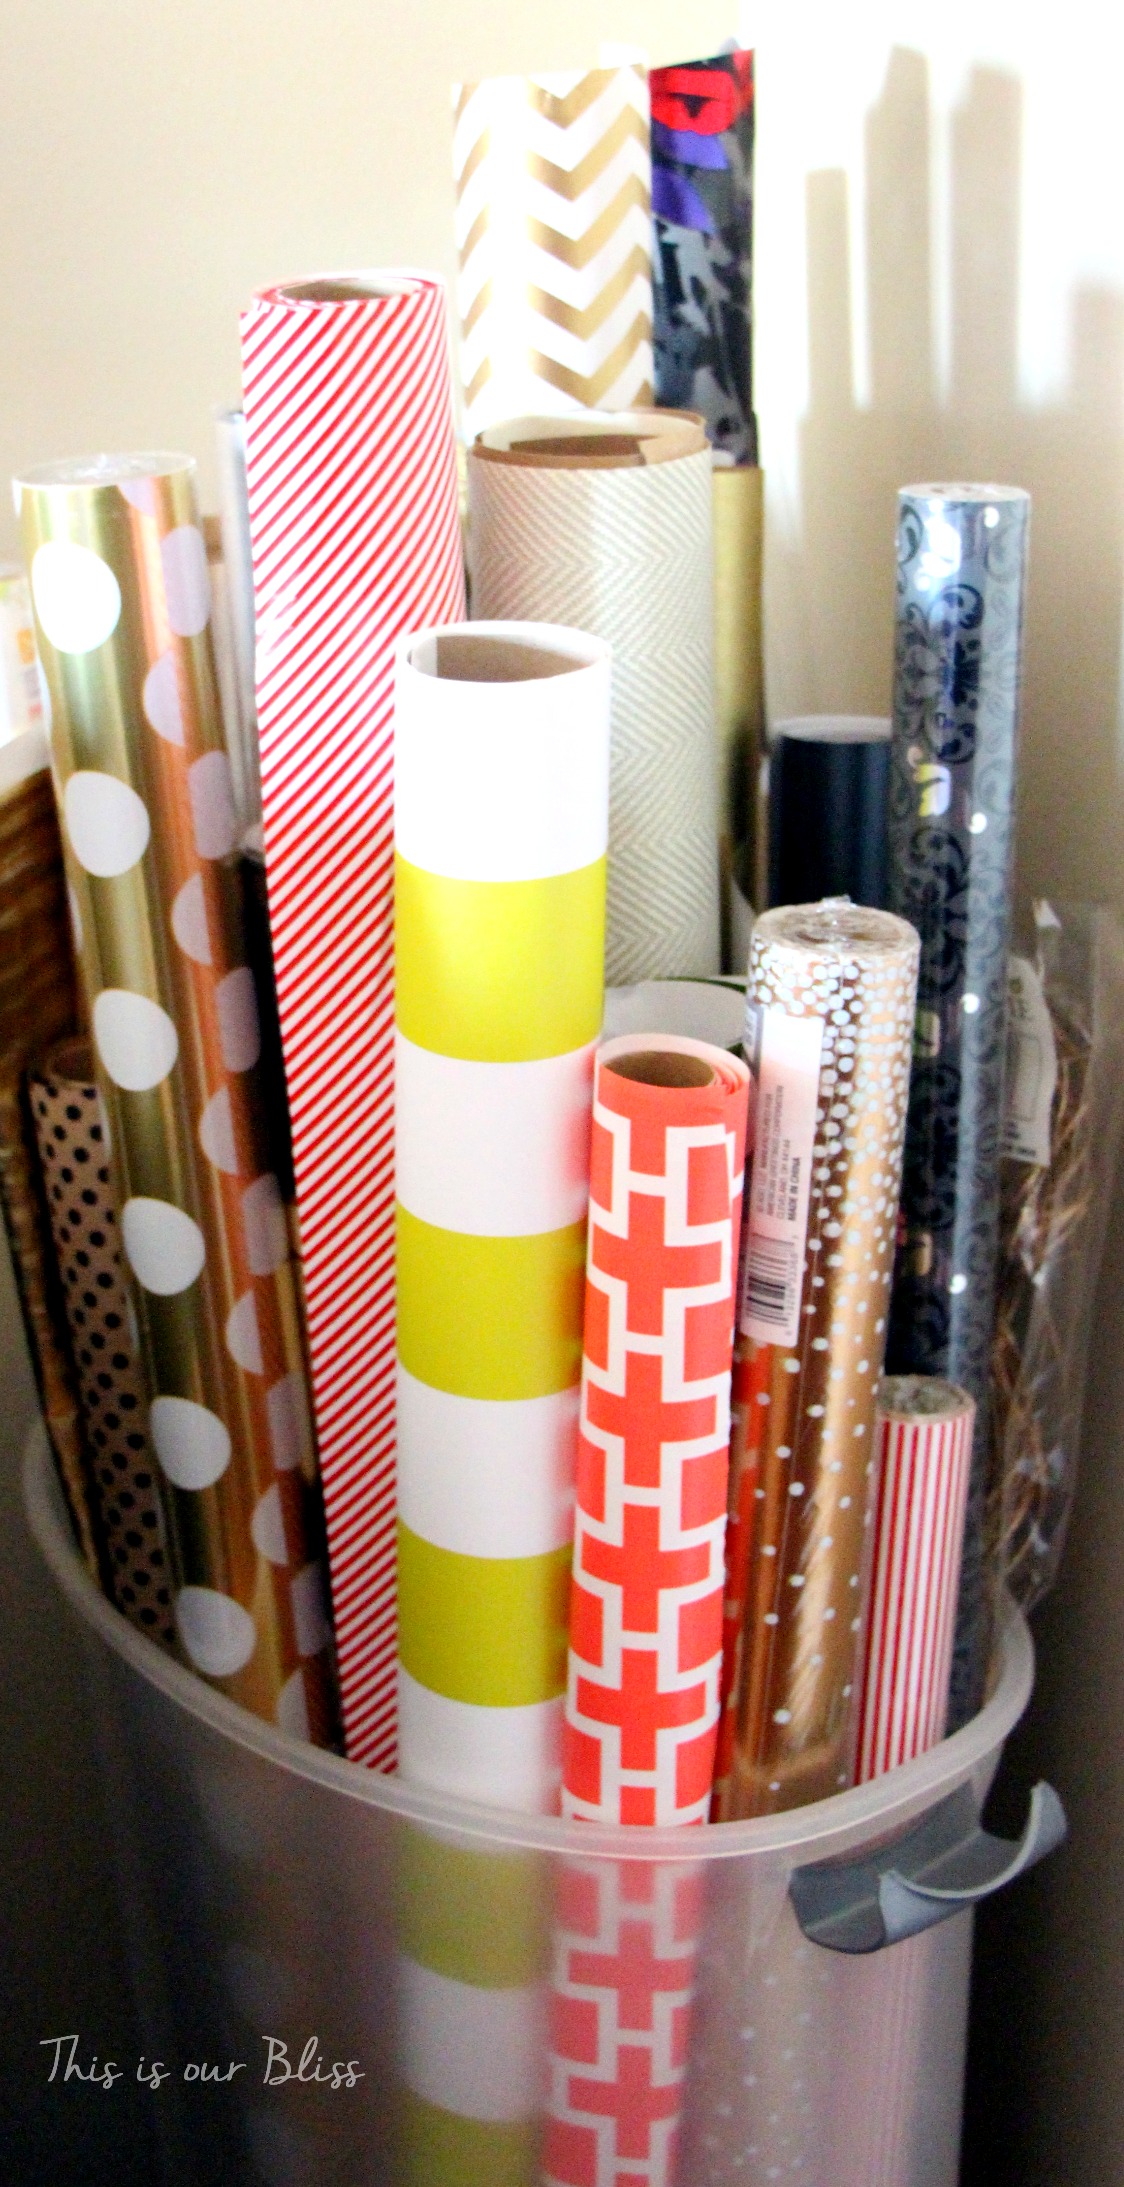 Wrapping Paper Supply Storage - Paper - HD Wallpaper 